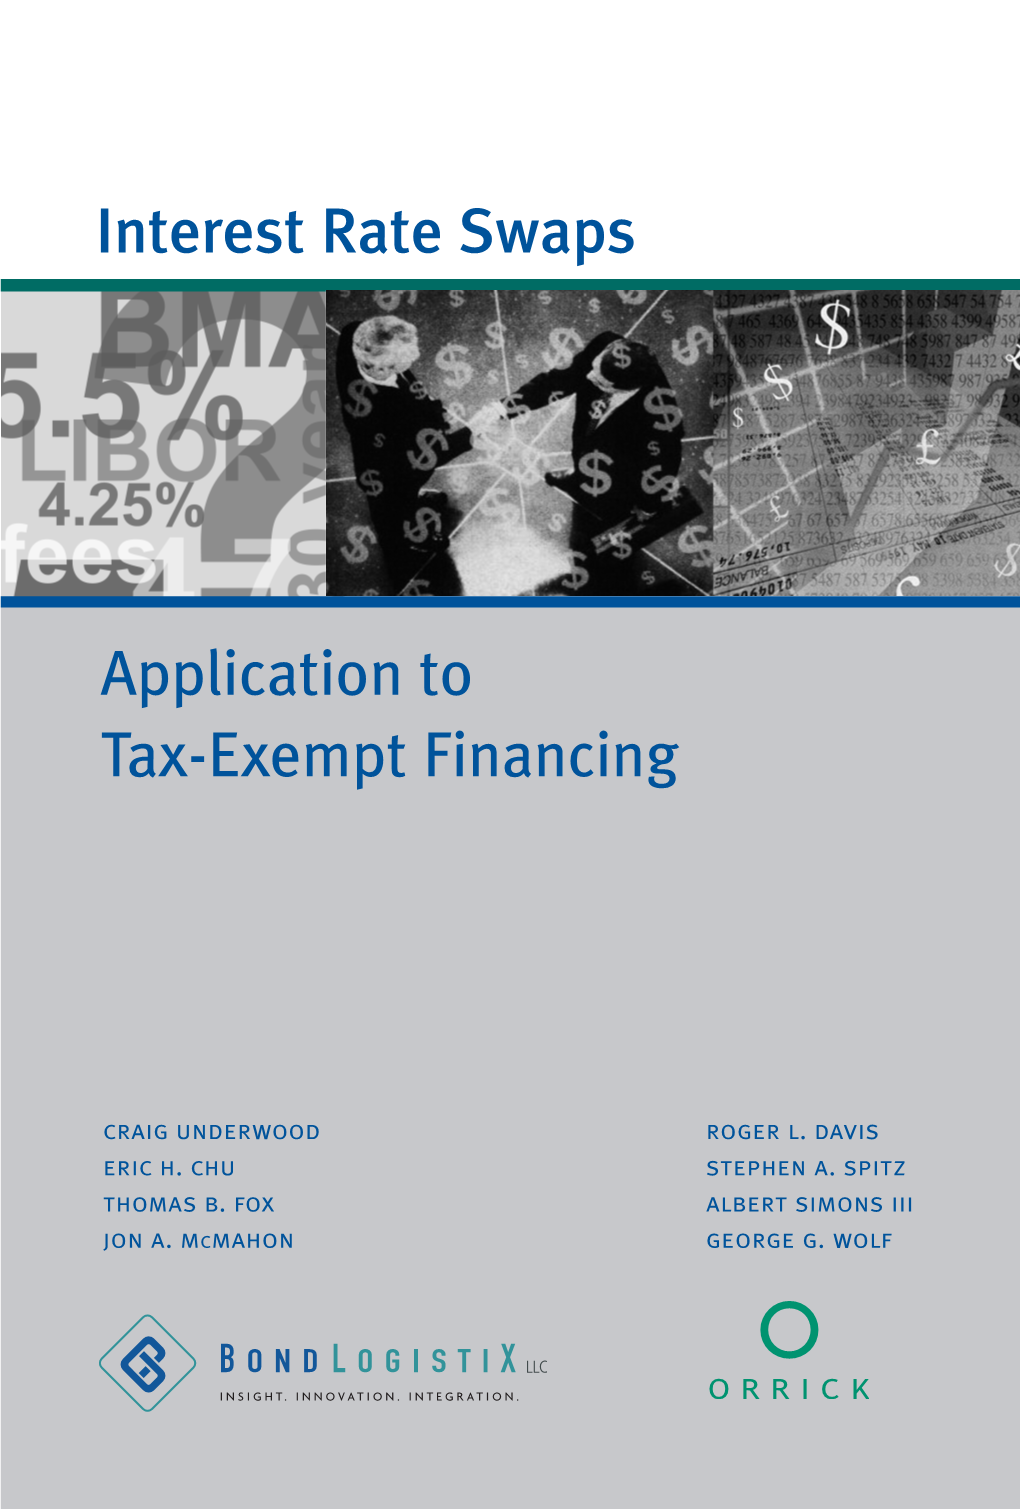 Application to Tax-Exempt Financing Interest Rate Swaps